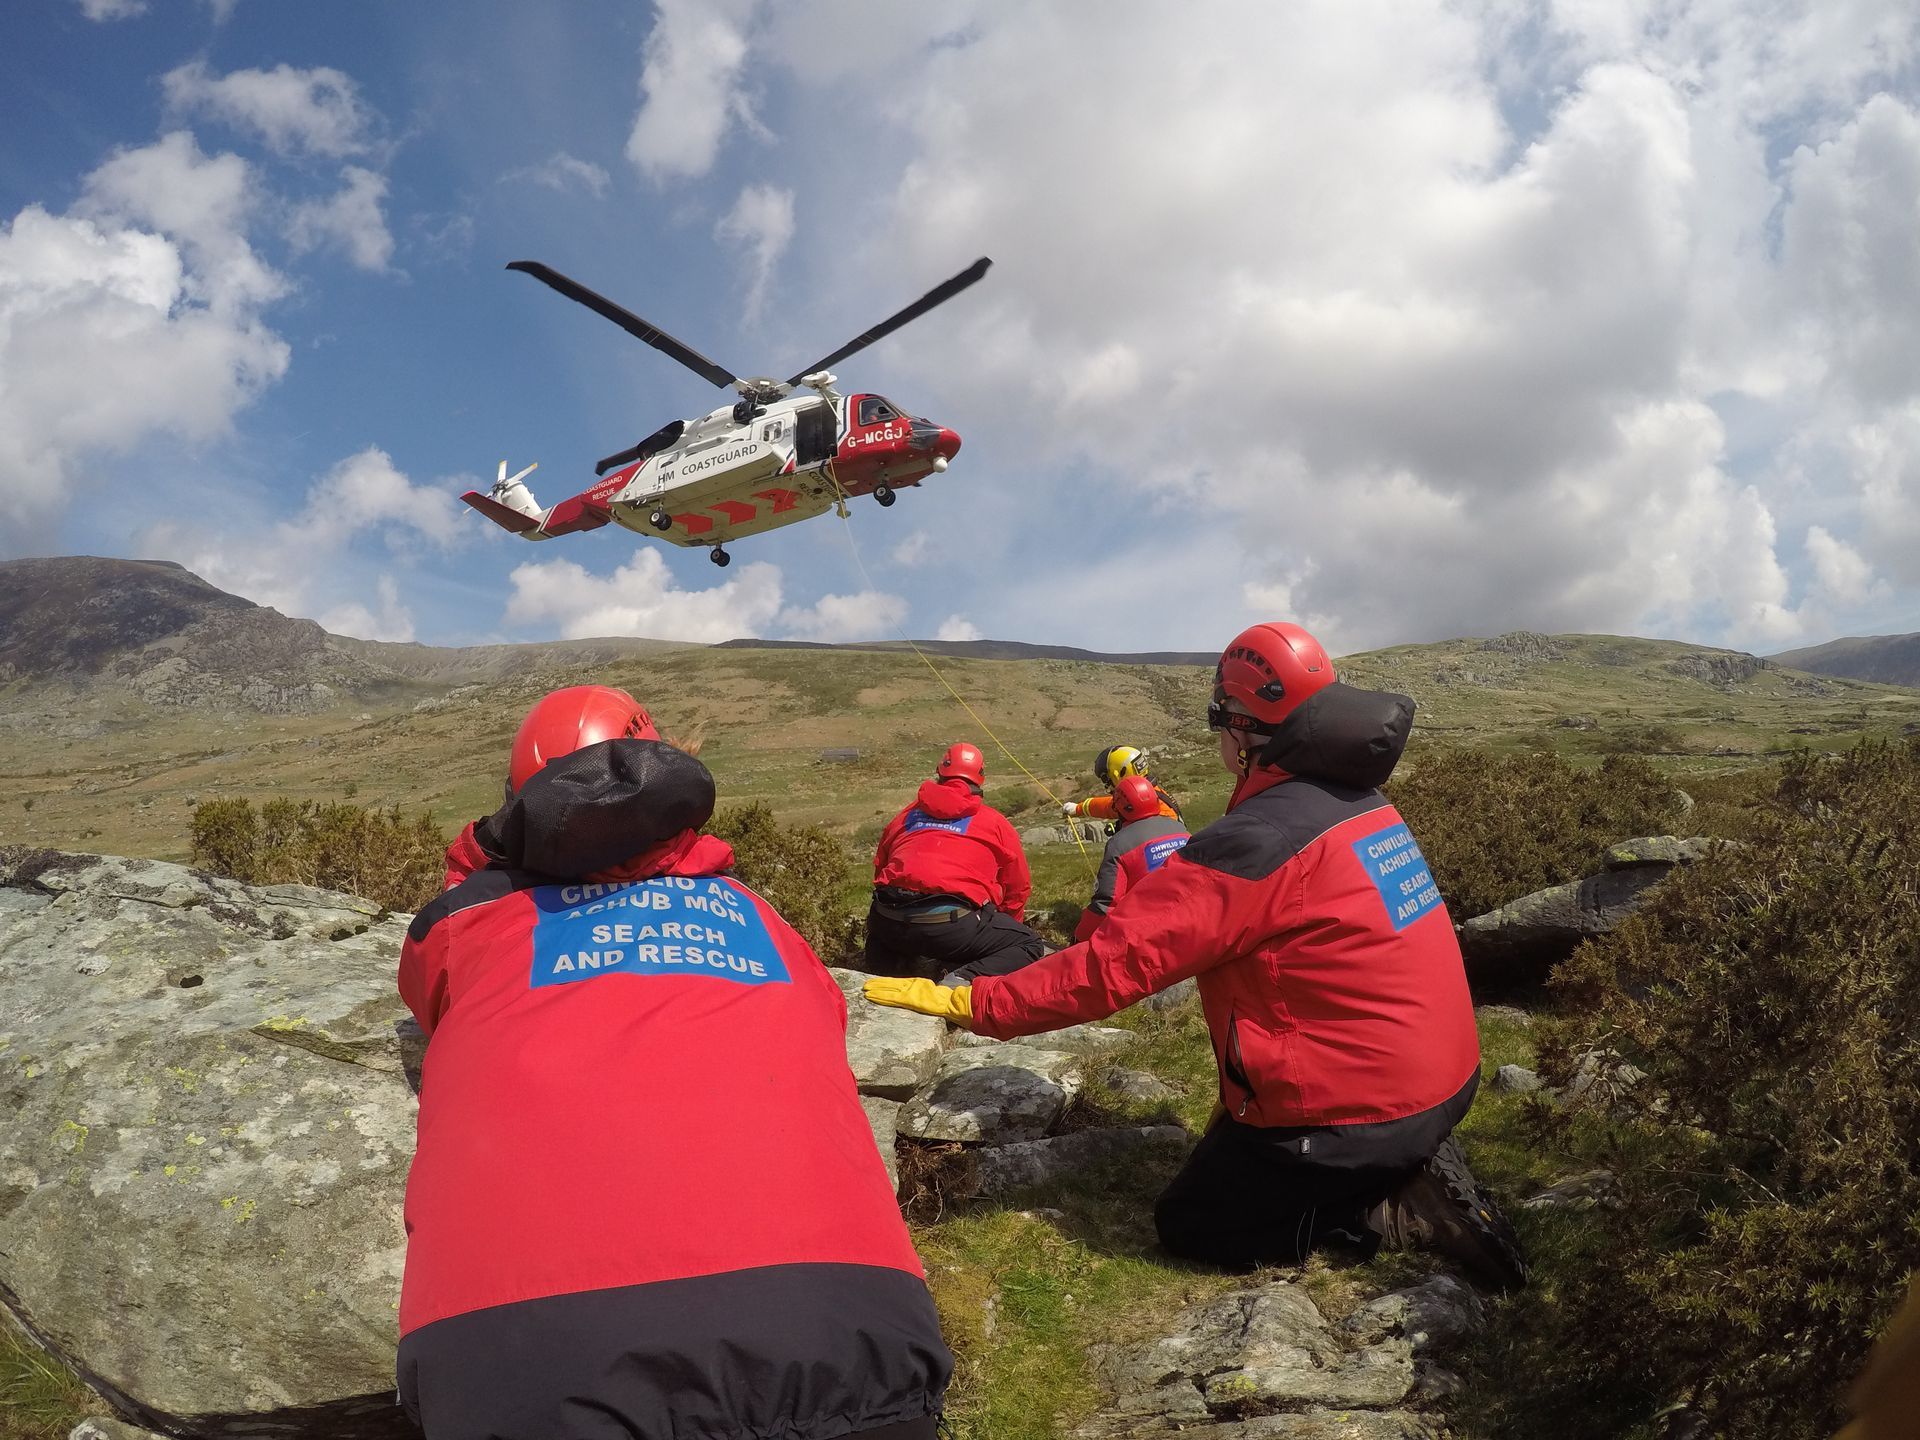 The Randal Charitable Foundation proudly supports Môn Search and Rescue